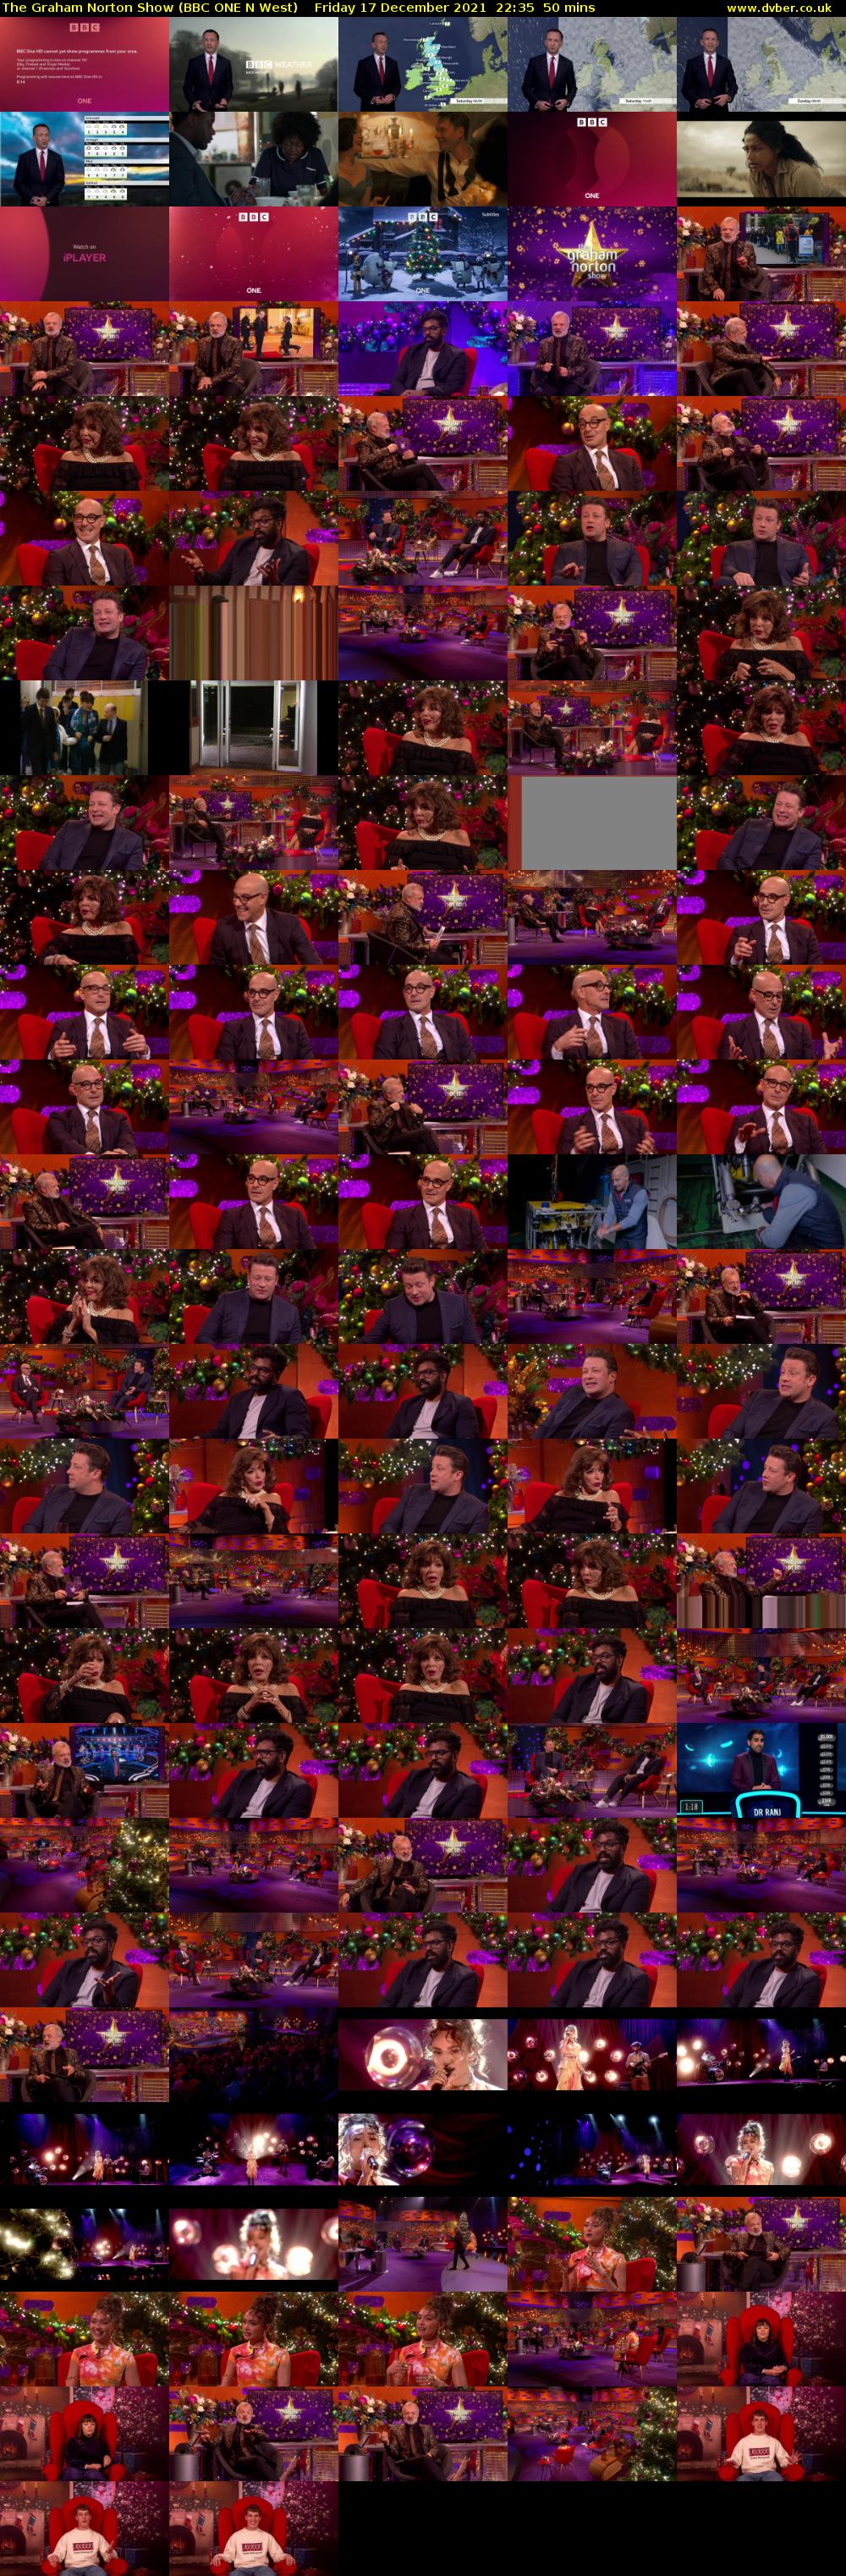 The Graham Norton Show (BBC ONE N West) Friday 17 December 2021 22:35 - 23:25